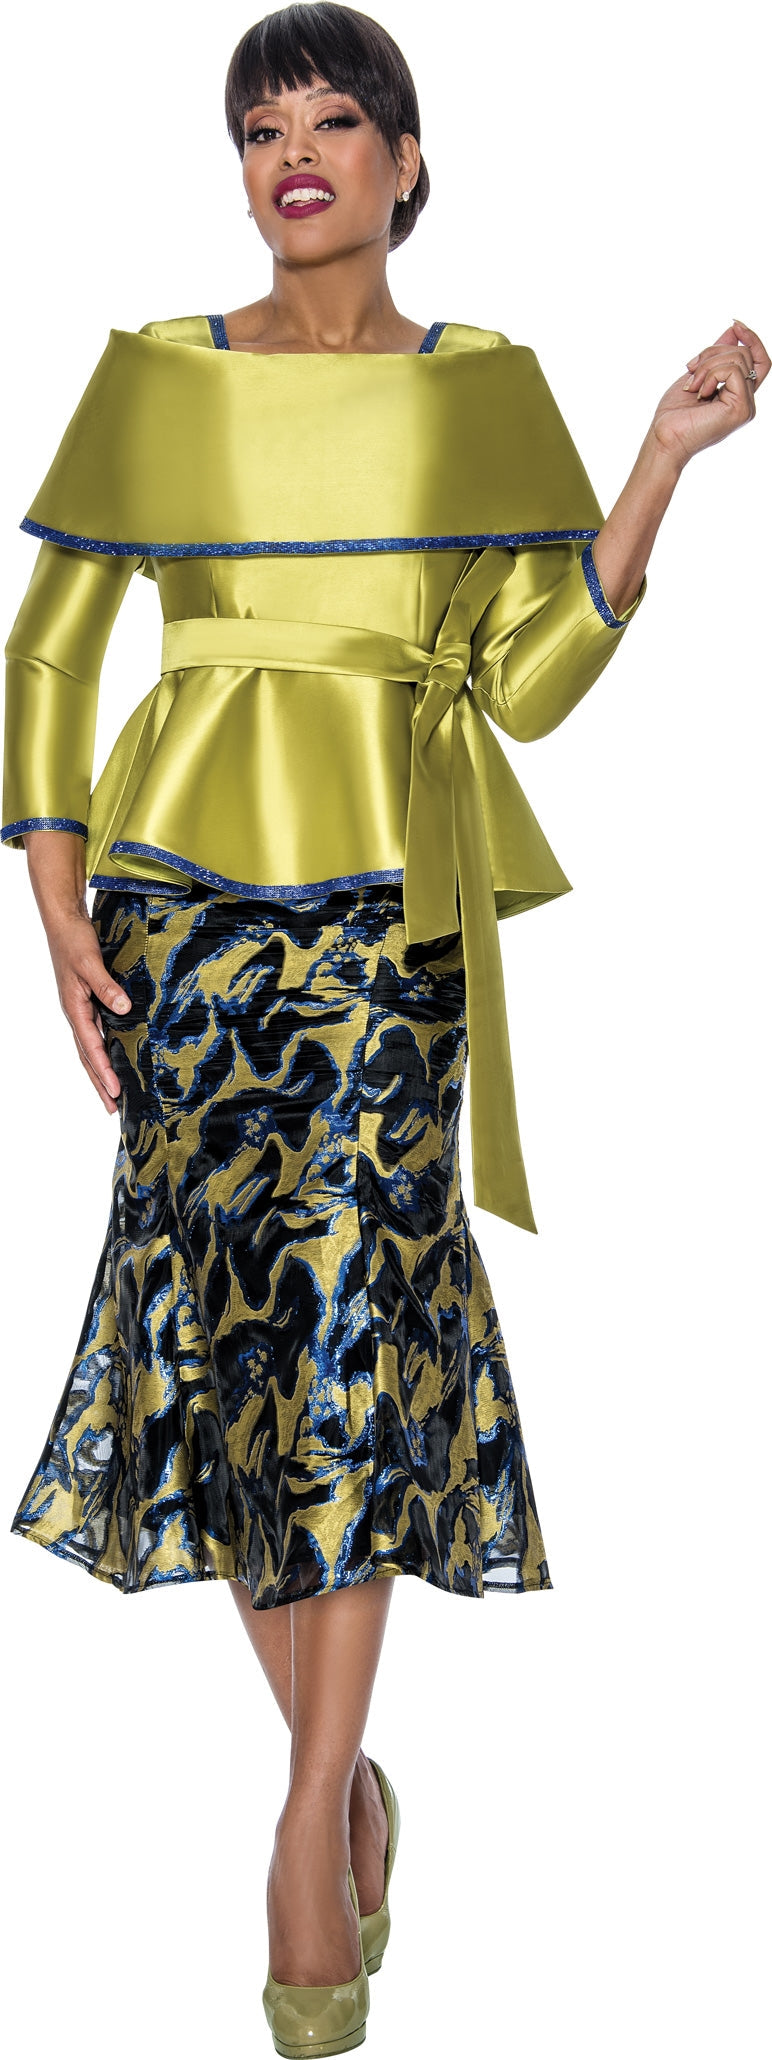 Divine Queen Skirt Suit 2292 - Church Suits For Less